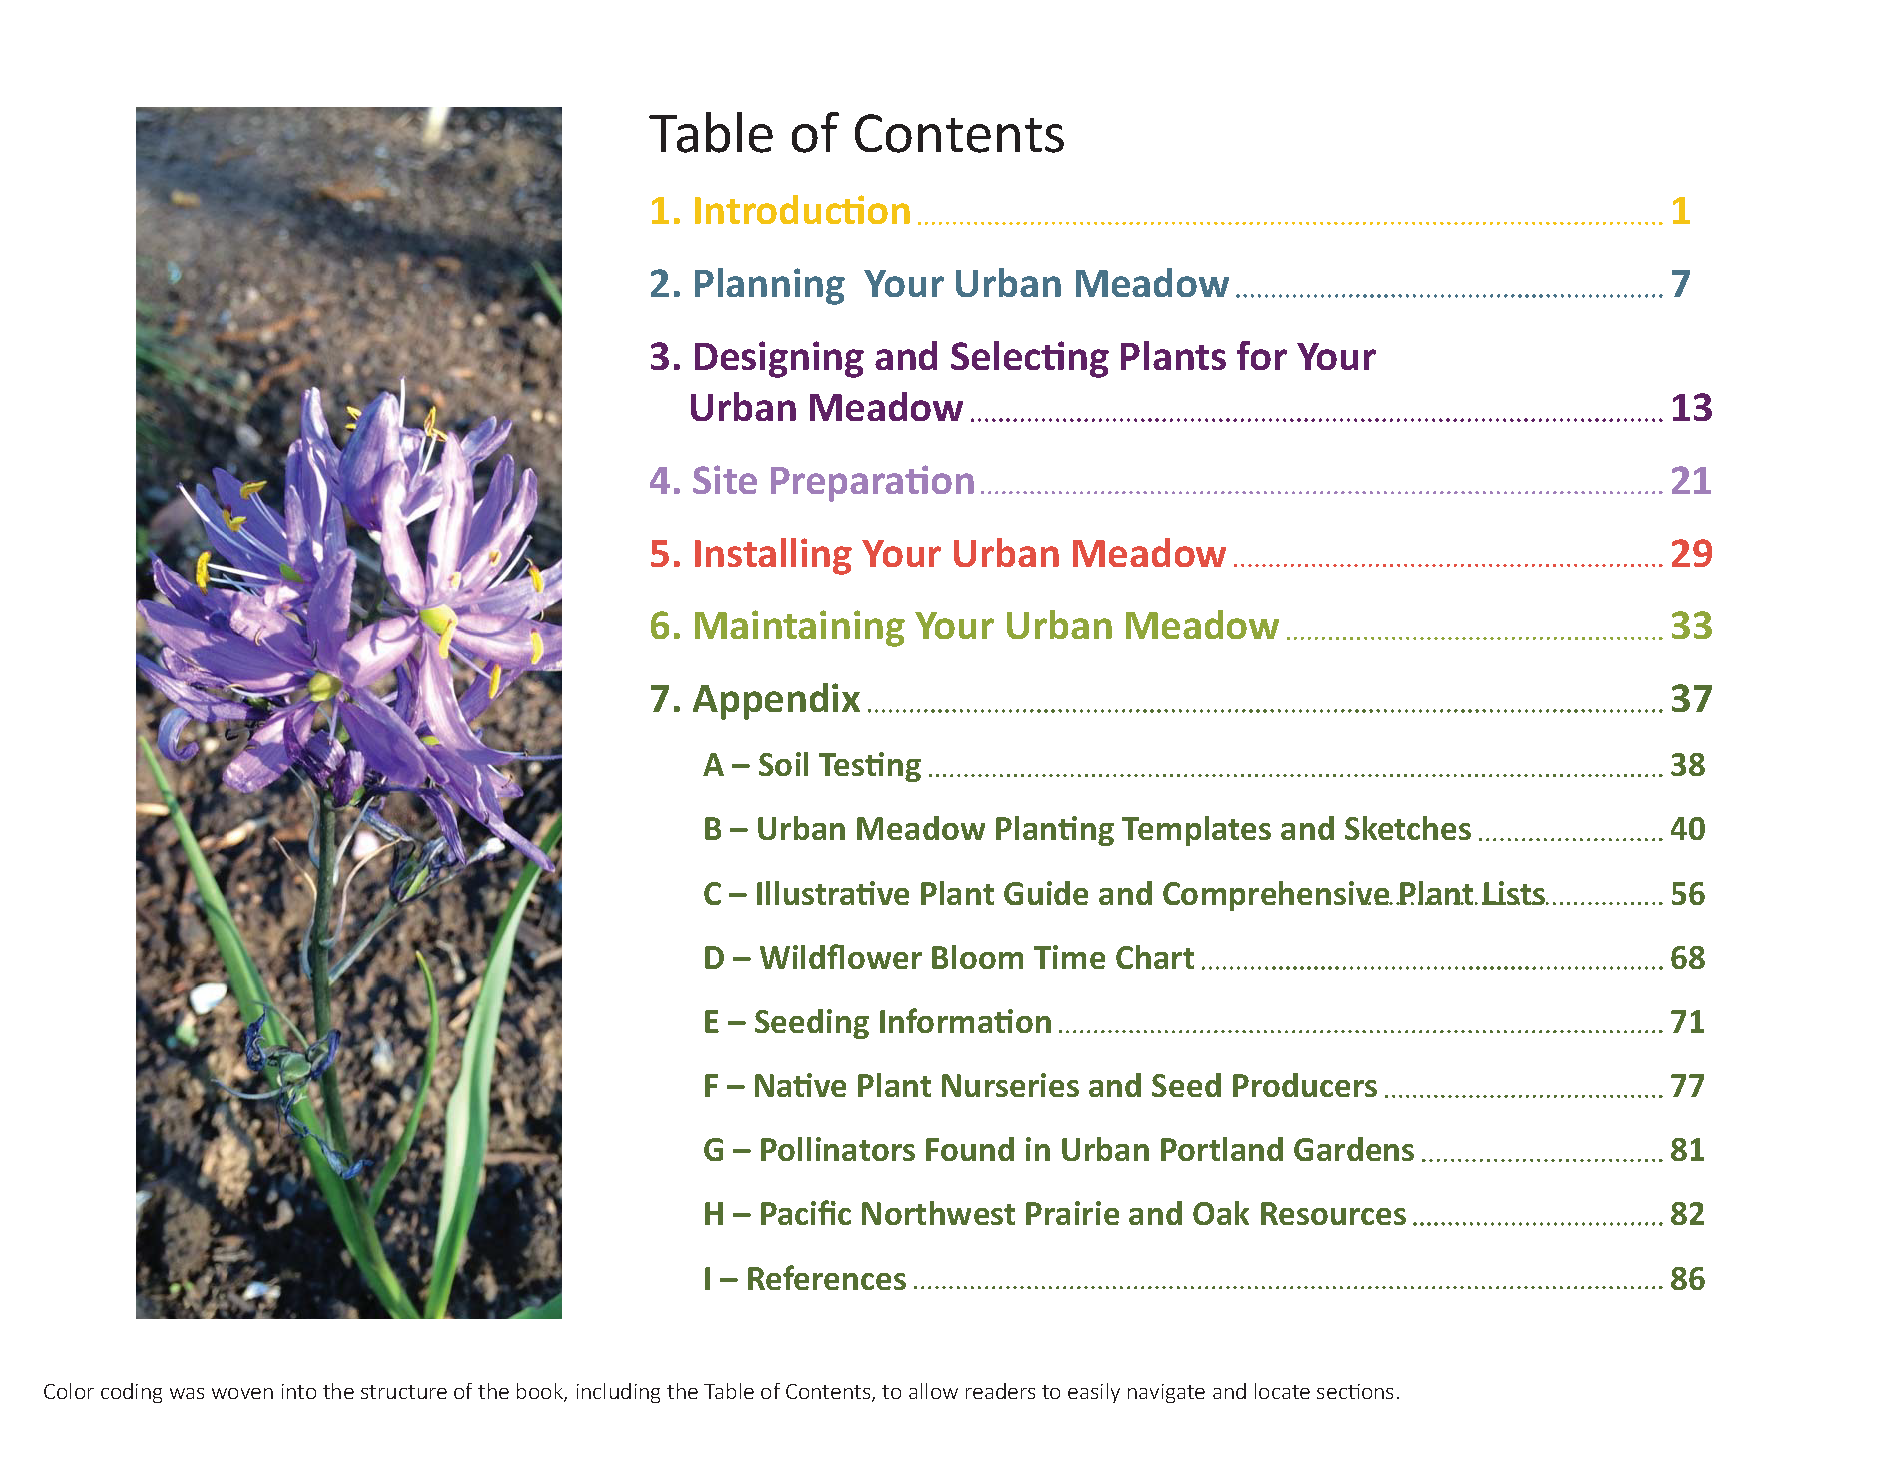 The Meadowscaping Handbook_Images_Page_2.png